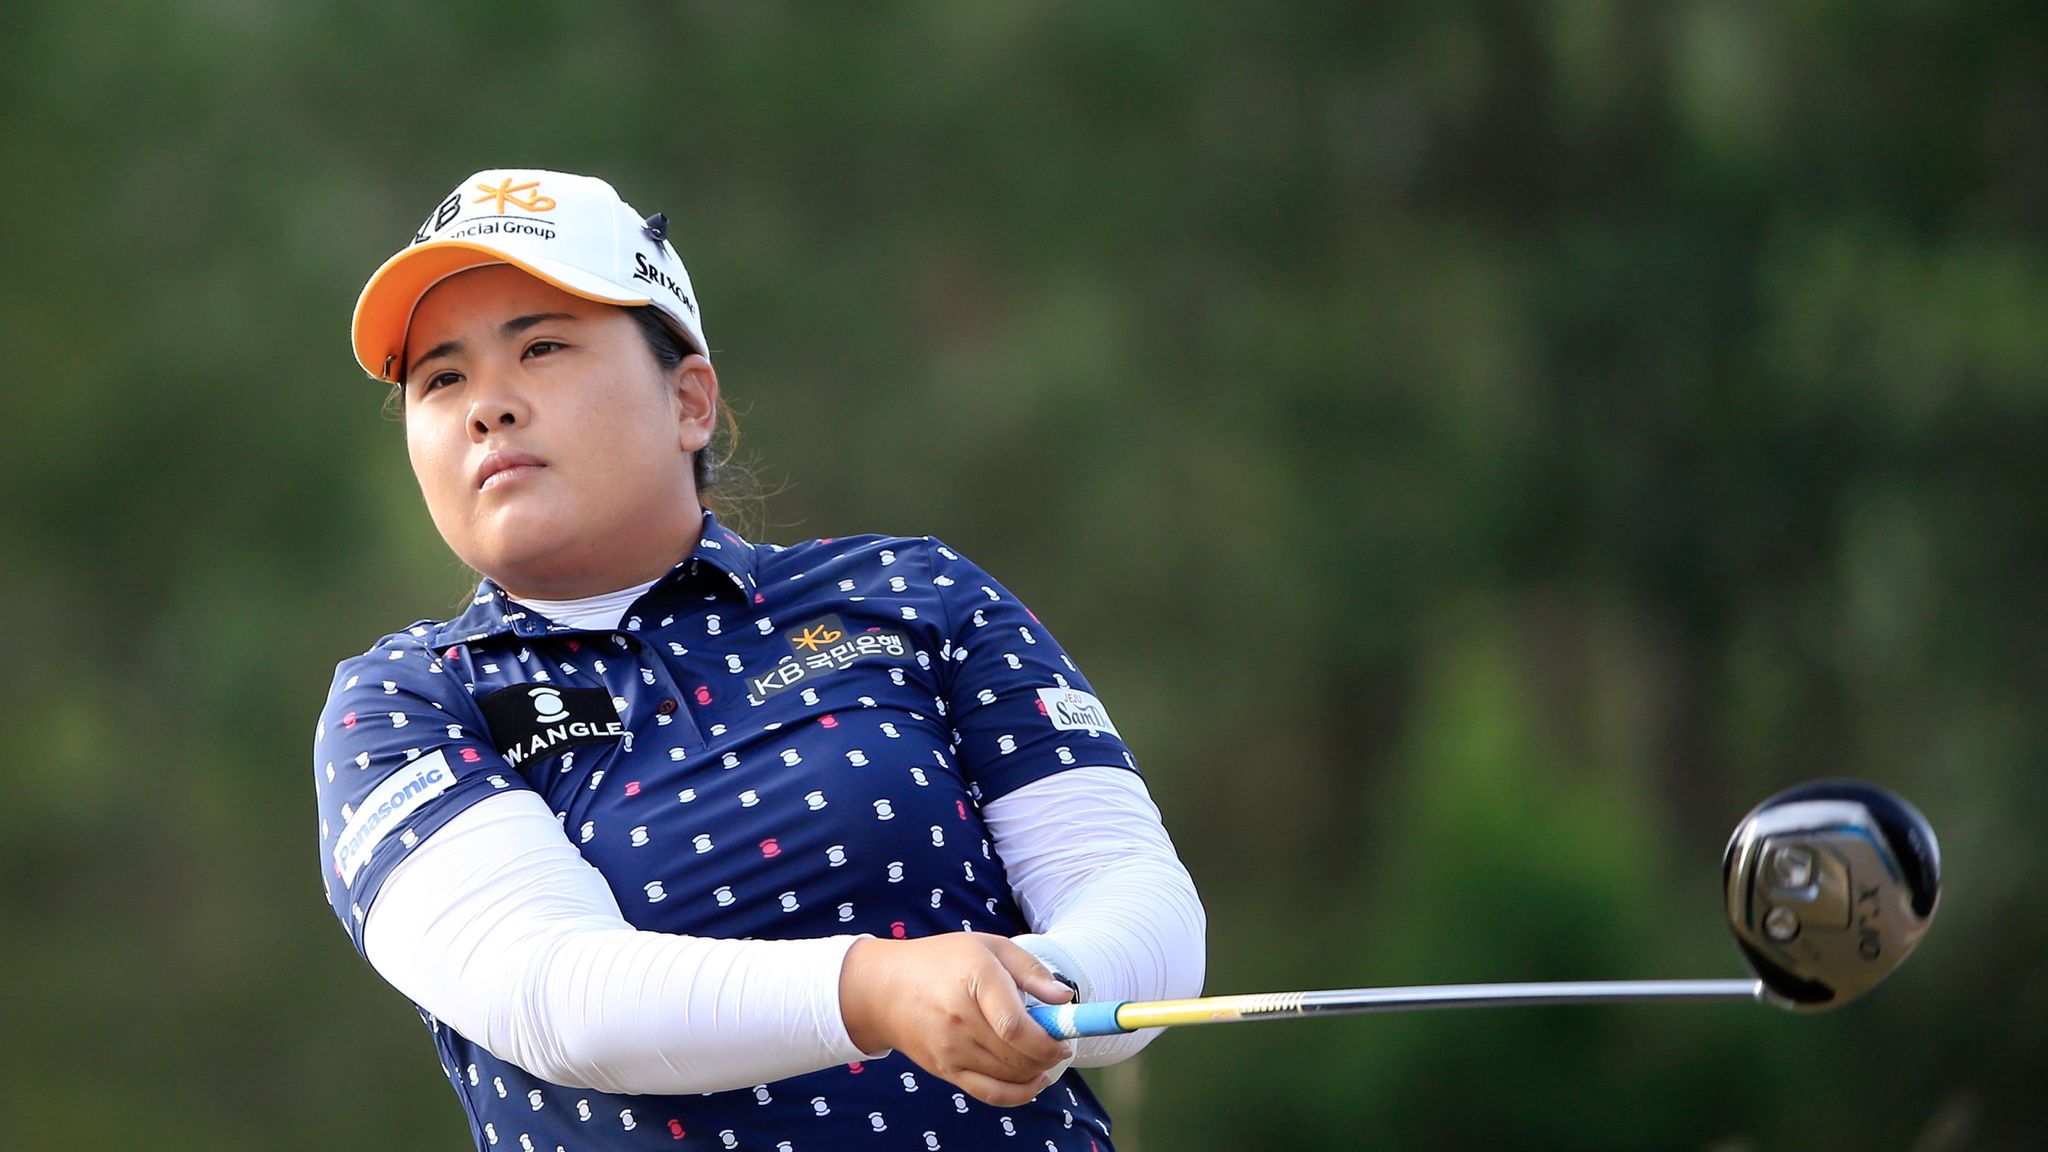 Lydia Ko only two shots ahead of Inbee Park in LPGA Tour finale | Golf ...